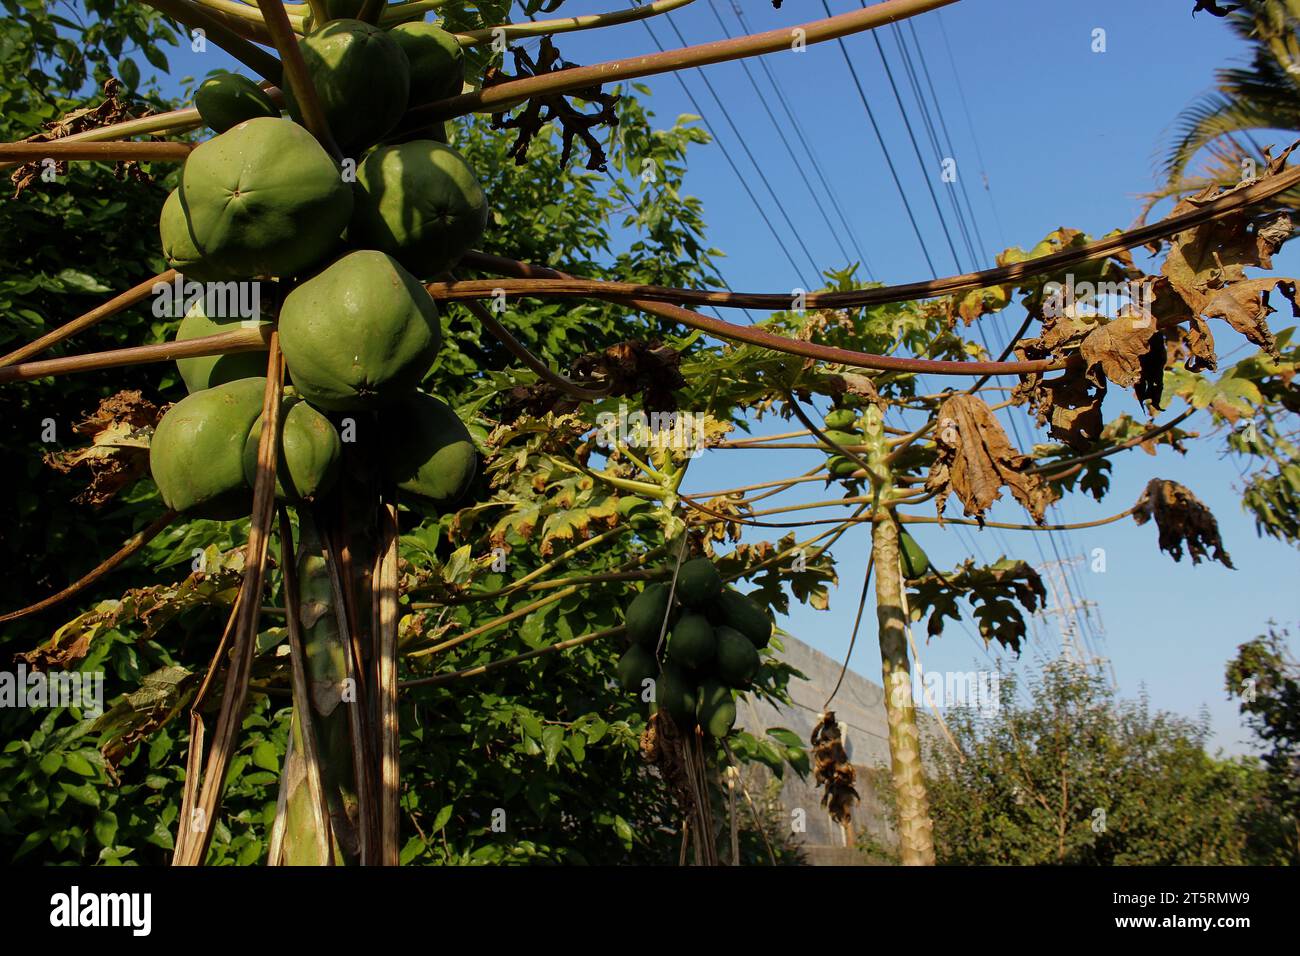 Papaya trees with green papaya fruits, grown in an organic community orchard on an urban electrical grid site land in the city of São Paulo. Stock Photo